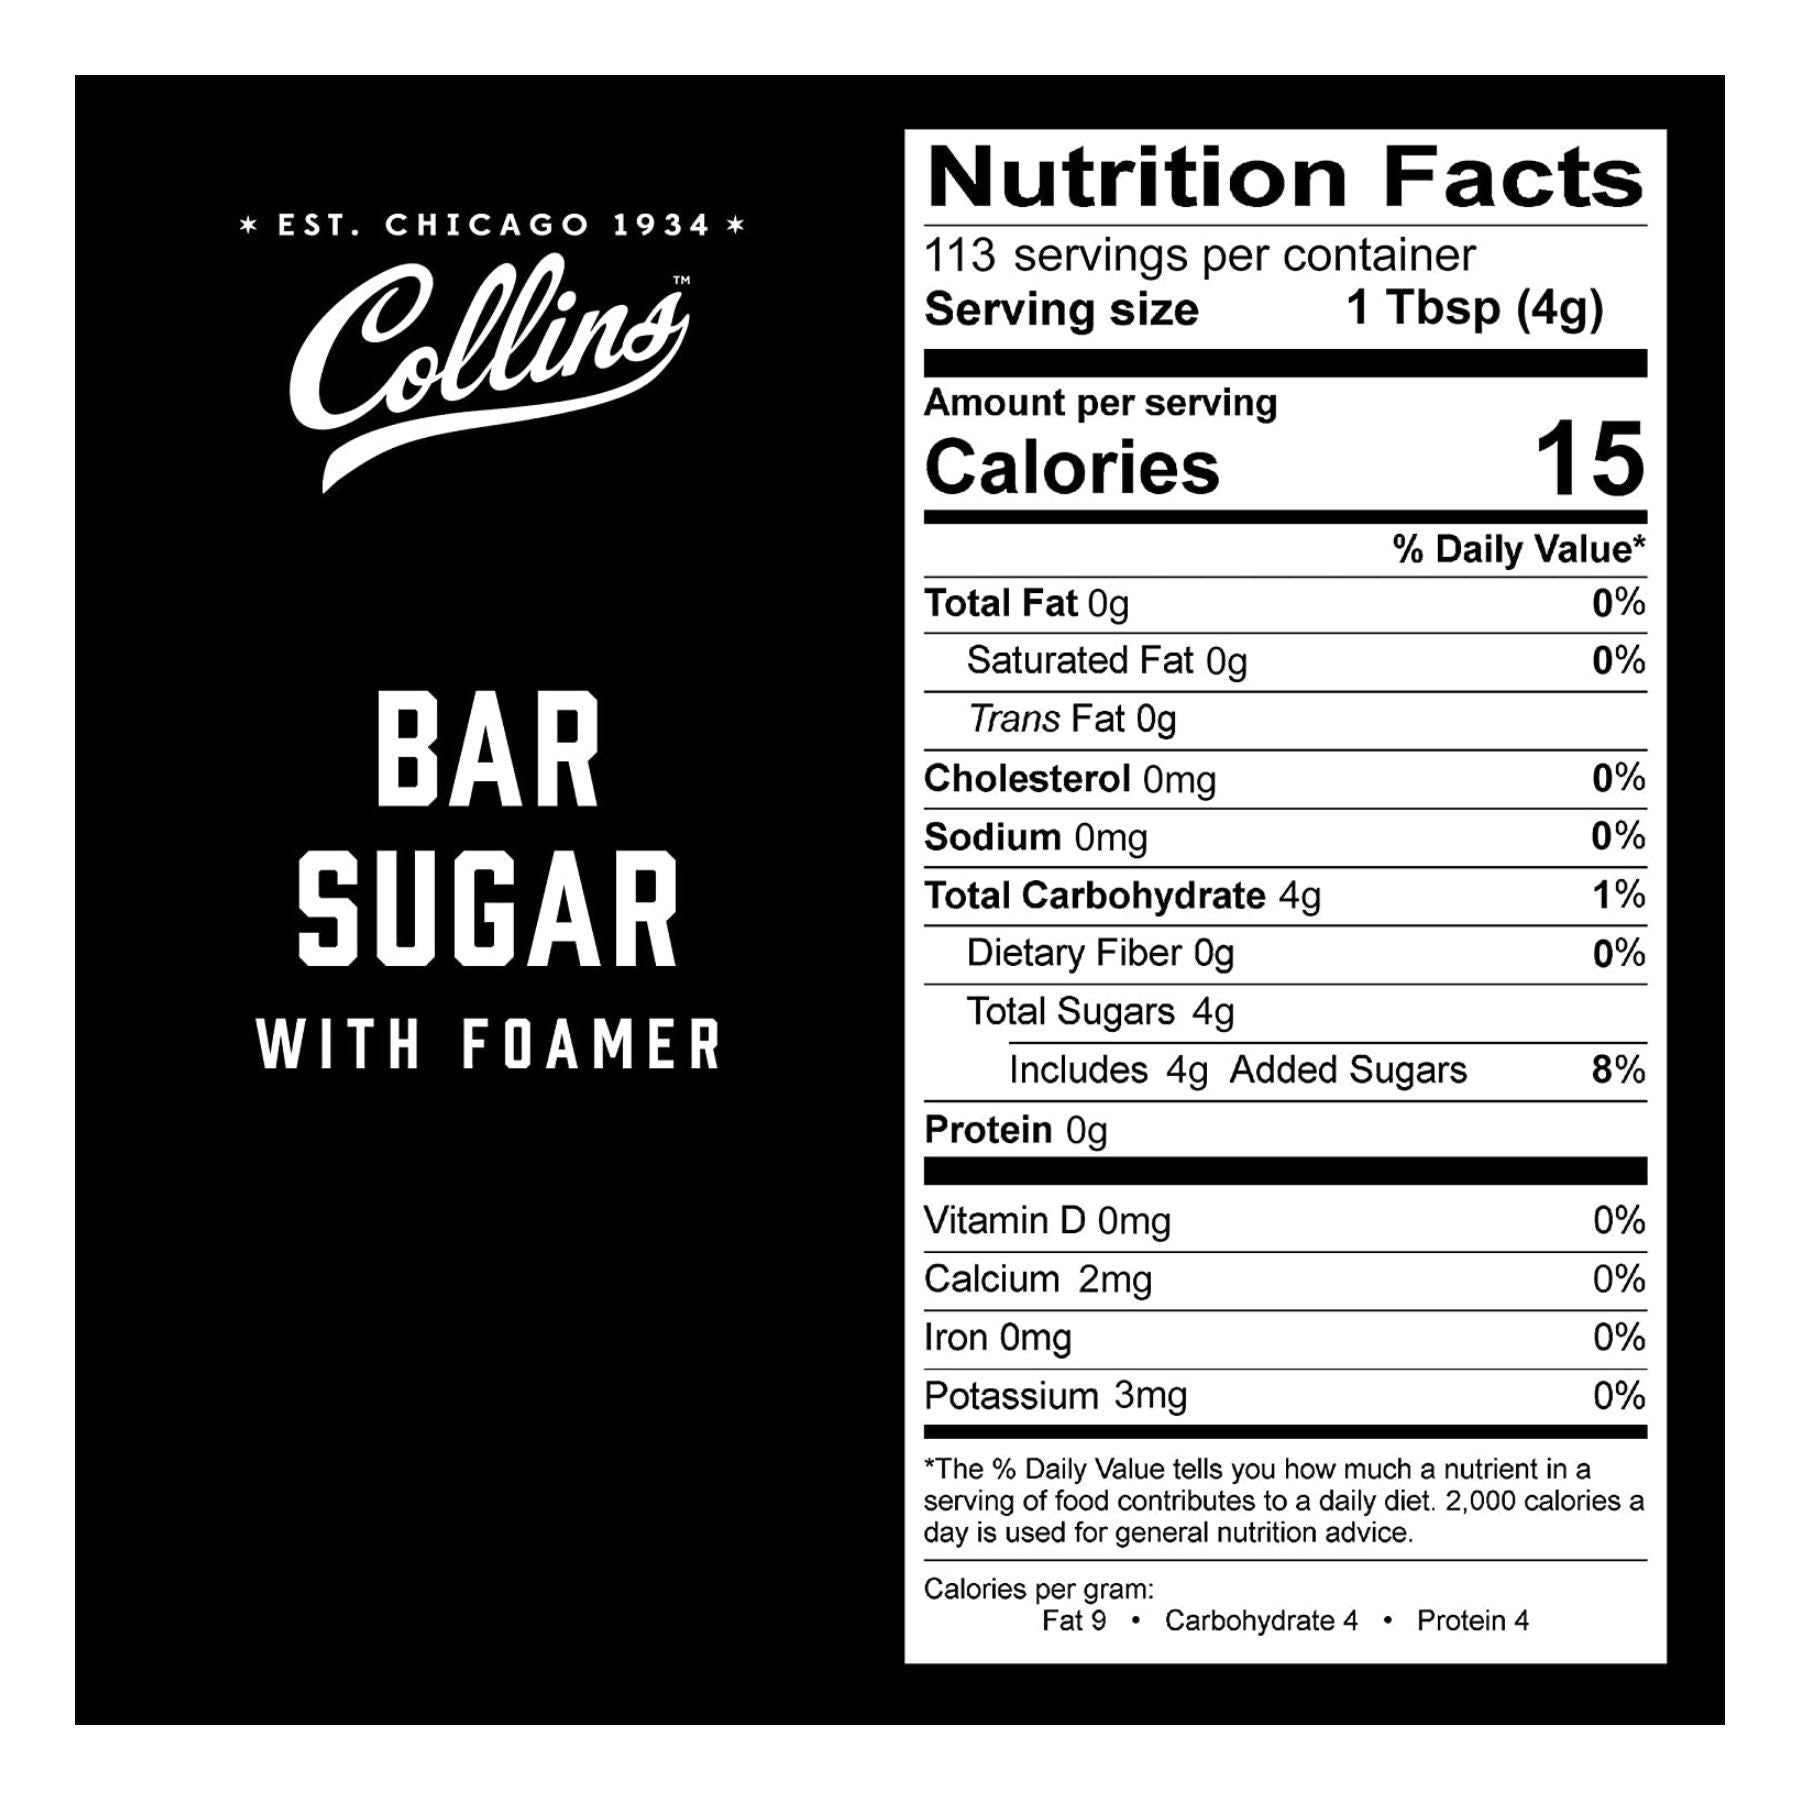 Collins Bar Sugar with Foamer  Create Foam Cocktails and Enhance